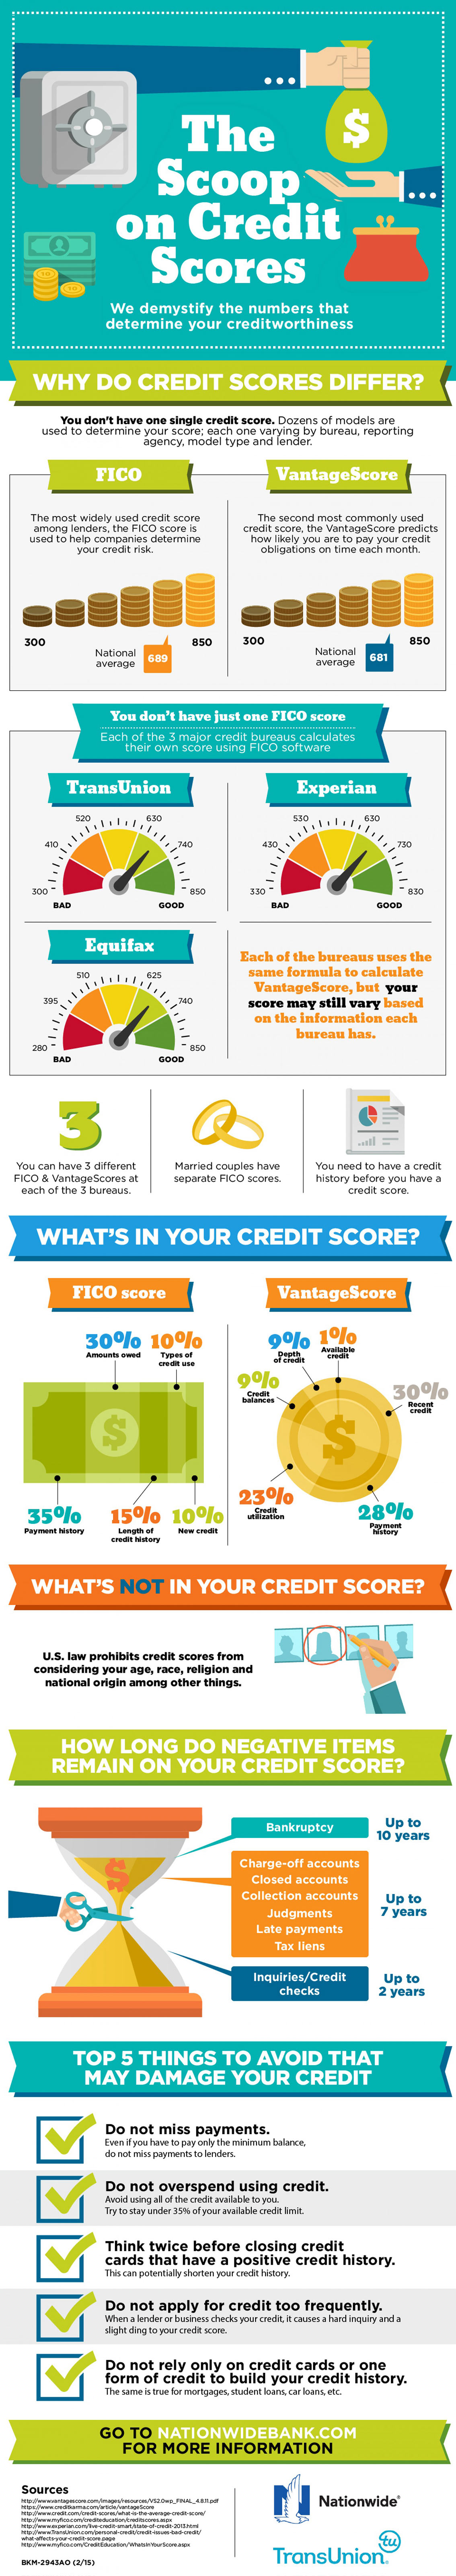 Why Do Credit Scores Differ - Finance Infographic